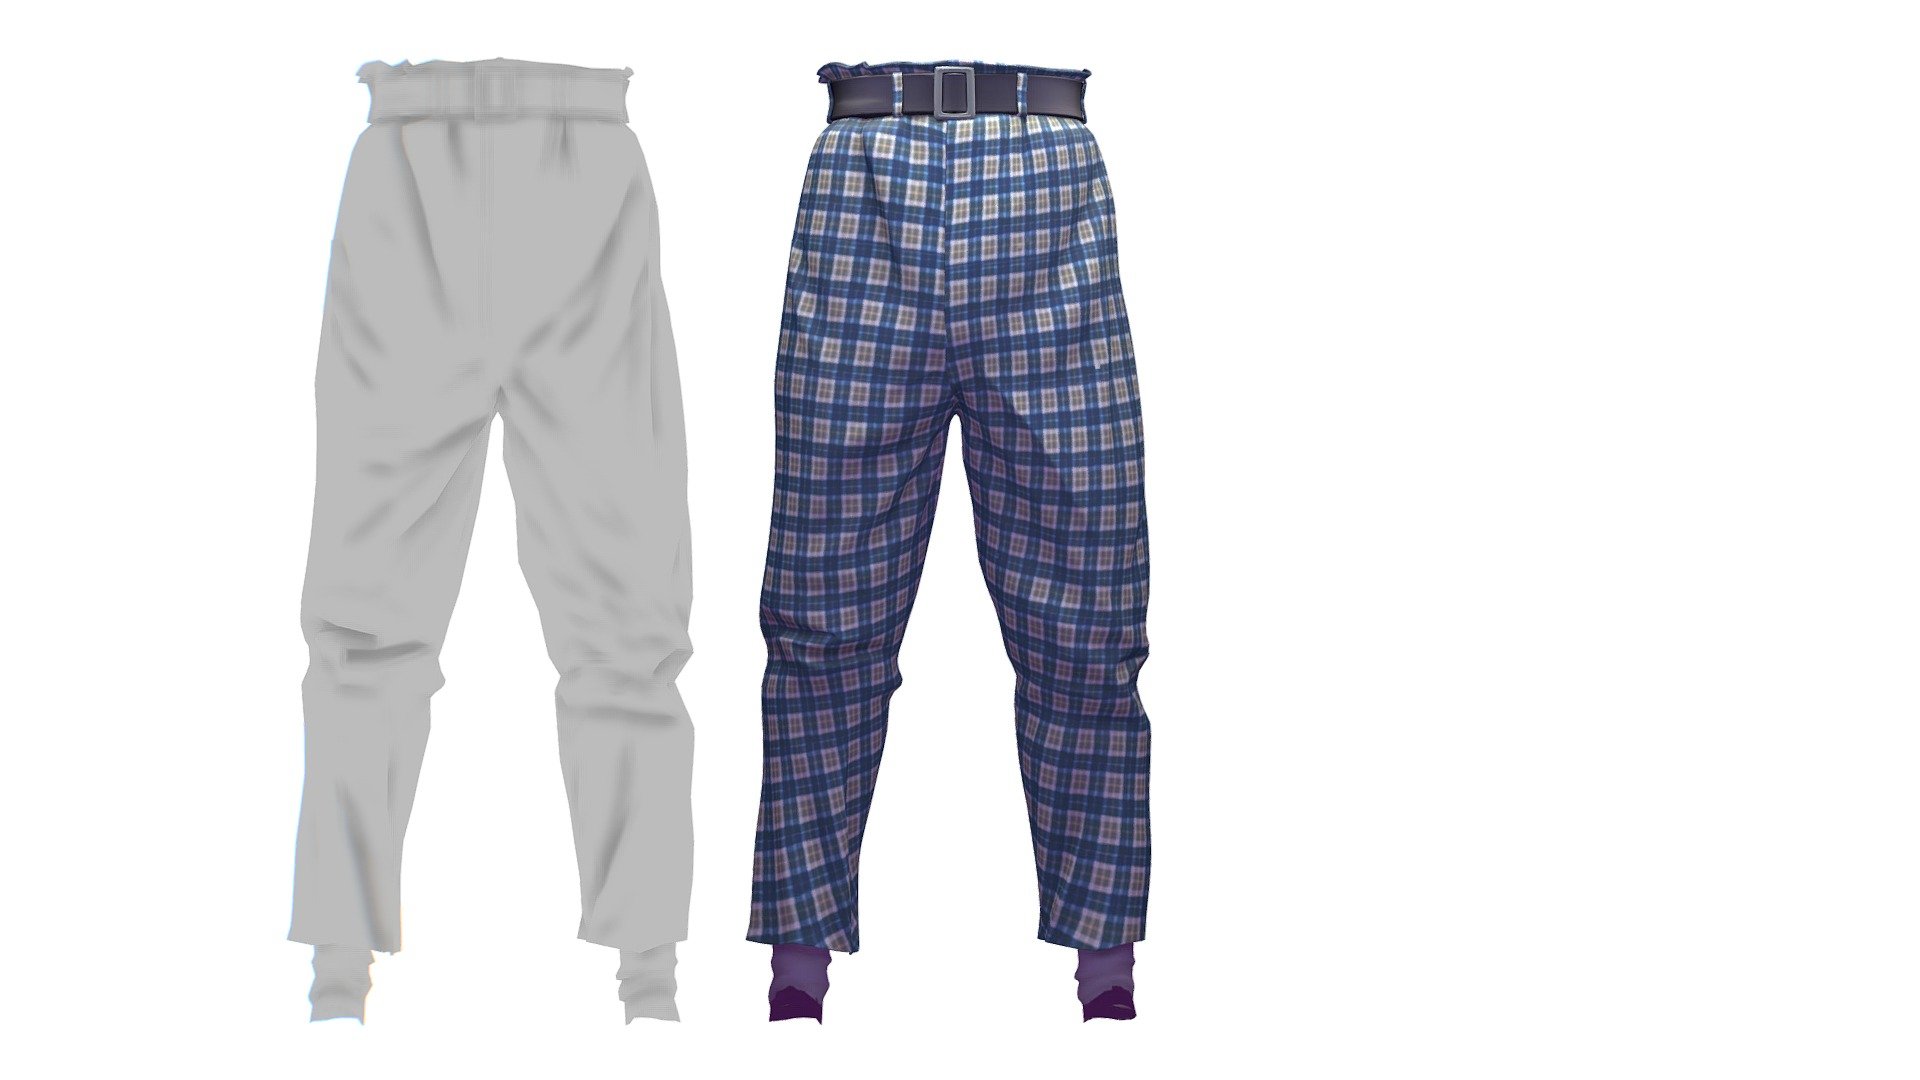 Cartoon High Poly Subdivision Checkered Pants

No HDRI map, No Light, No material settings - only Diffuse/Color Map Texture (2700x2700)

More information about the 3D model: please use the Sketchfab Model Inspector - Key (i) - Cartoon High Poly Subdivision Checkered Pants - Buy Royalty Free 3D model by Oleg Shuldiakov (@olegshuldiakov) 3d model